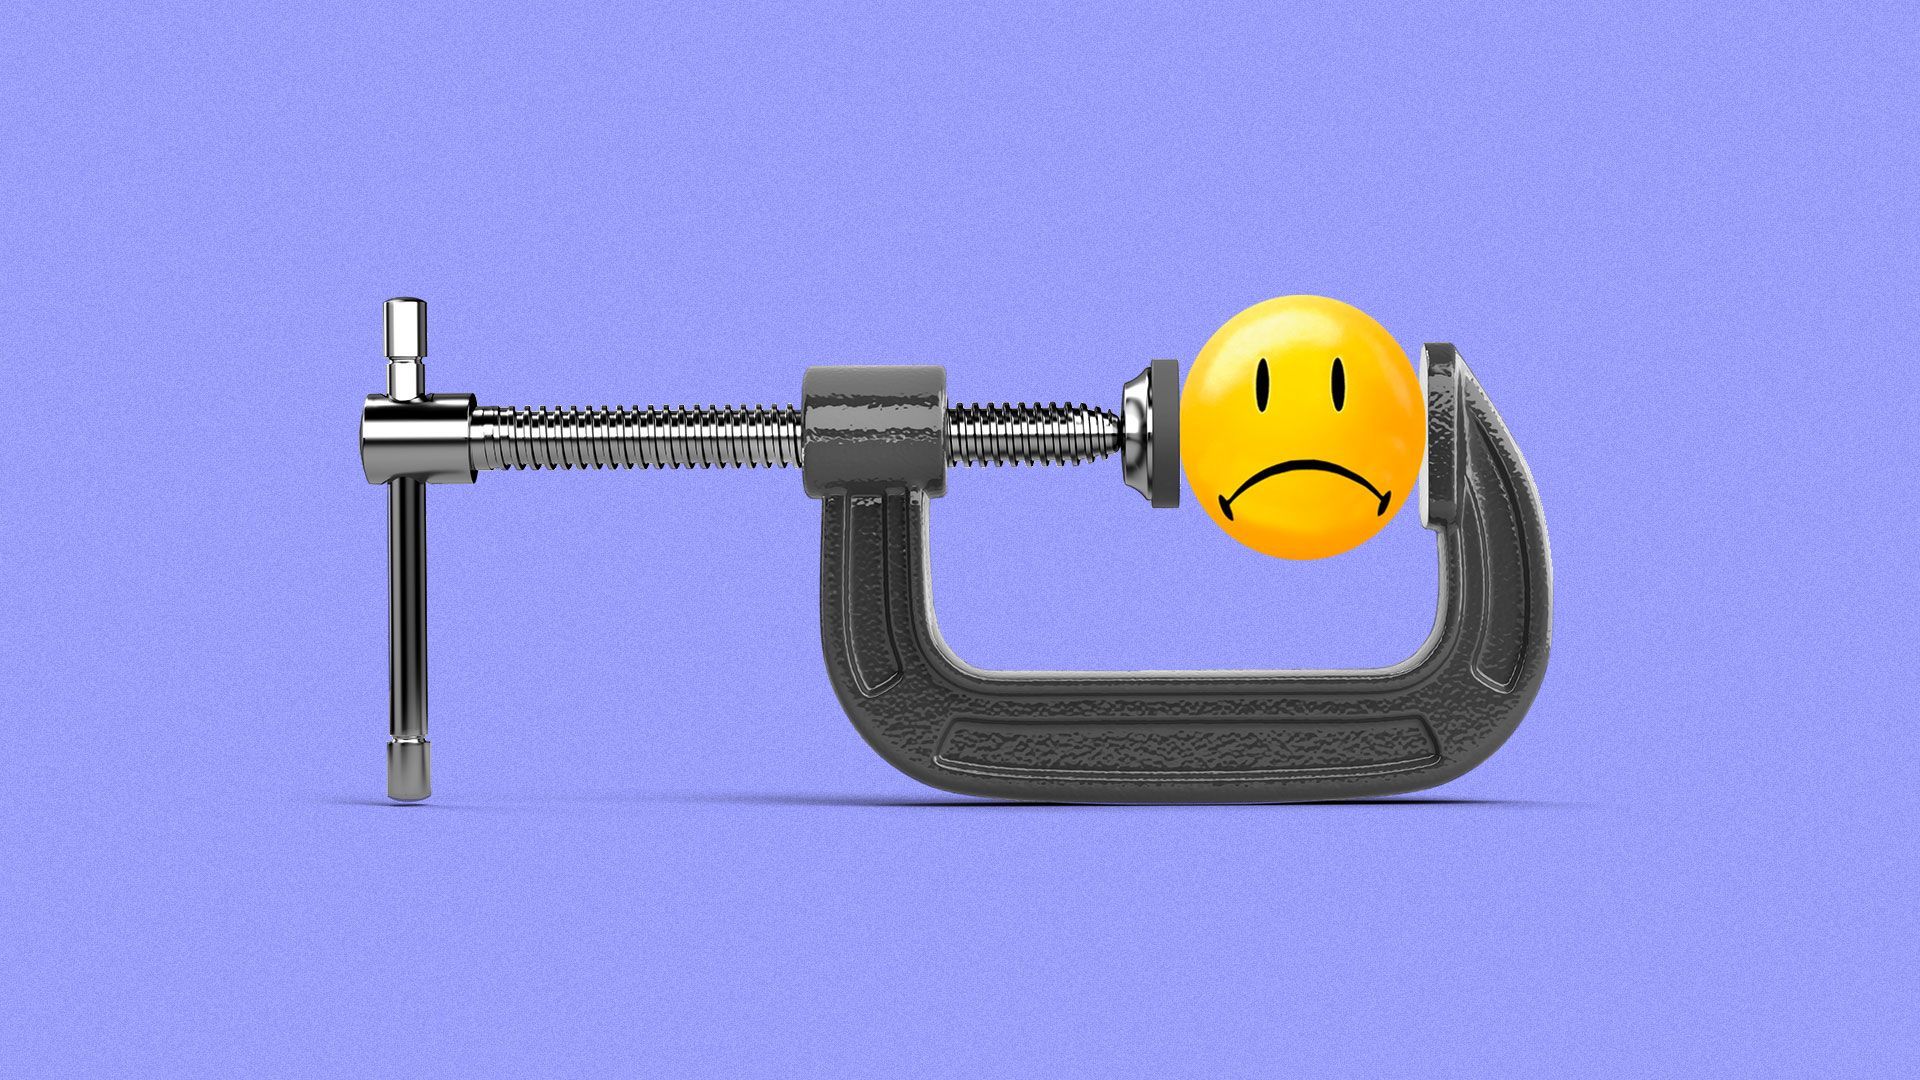 Illustration of a vise grip squeezing a frowning rollback smiley face